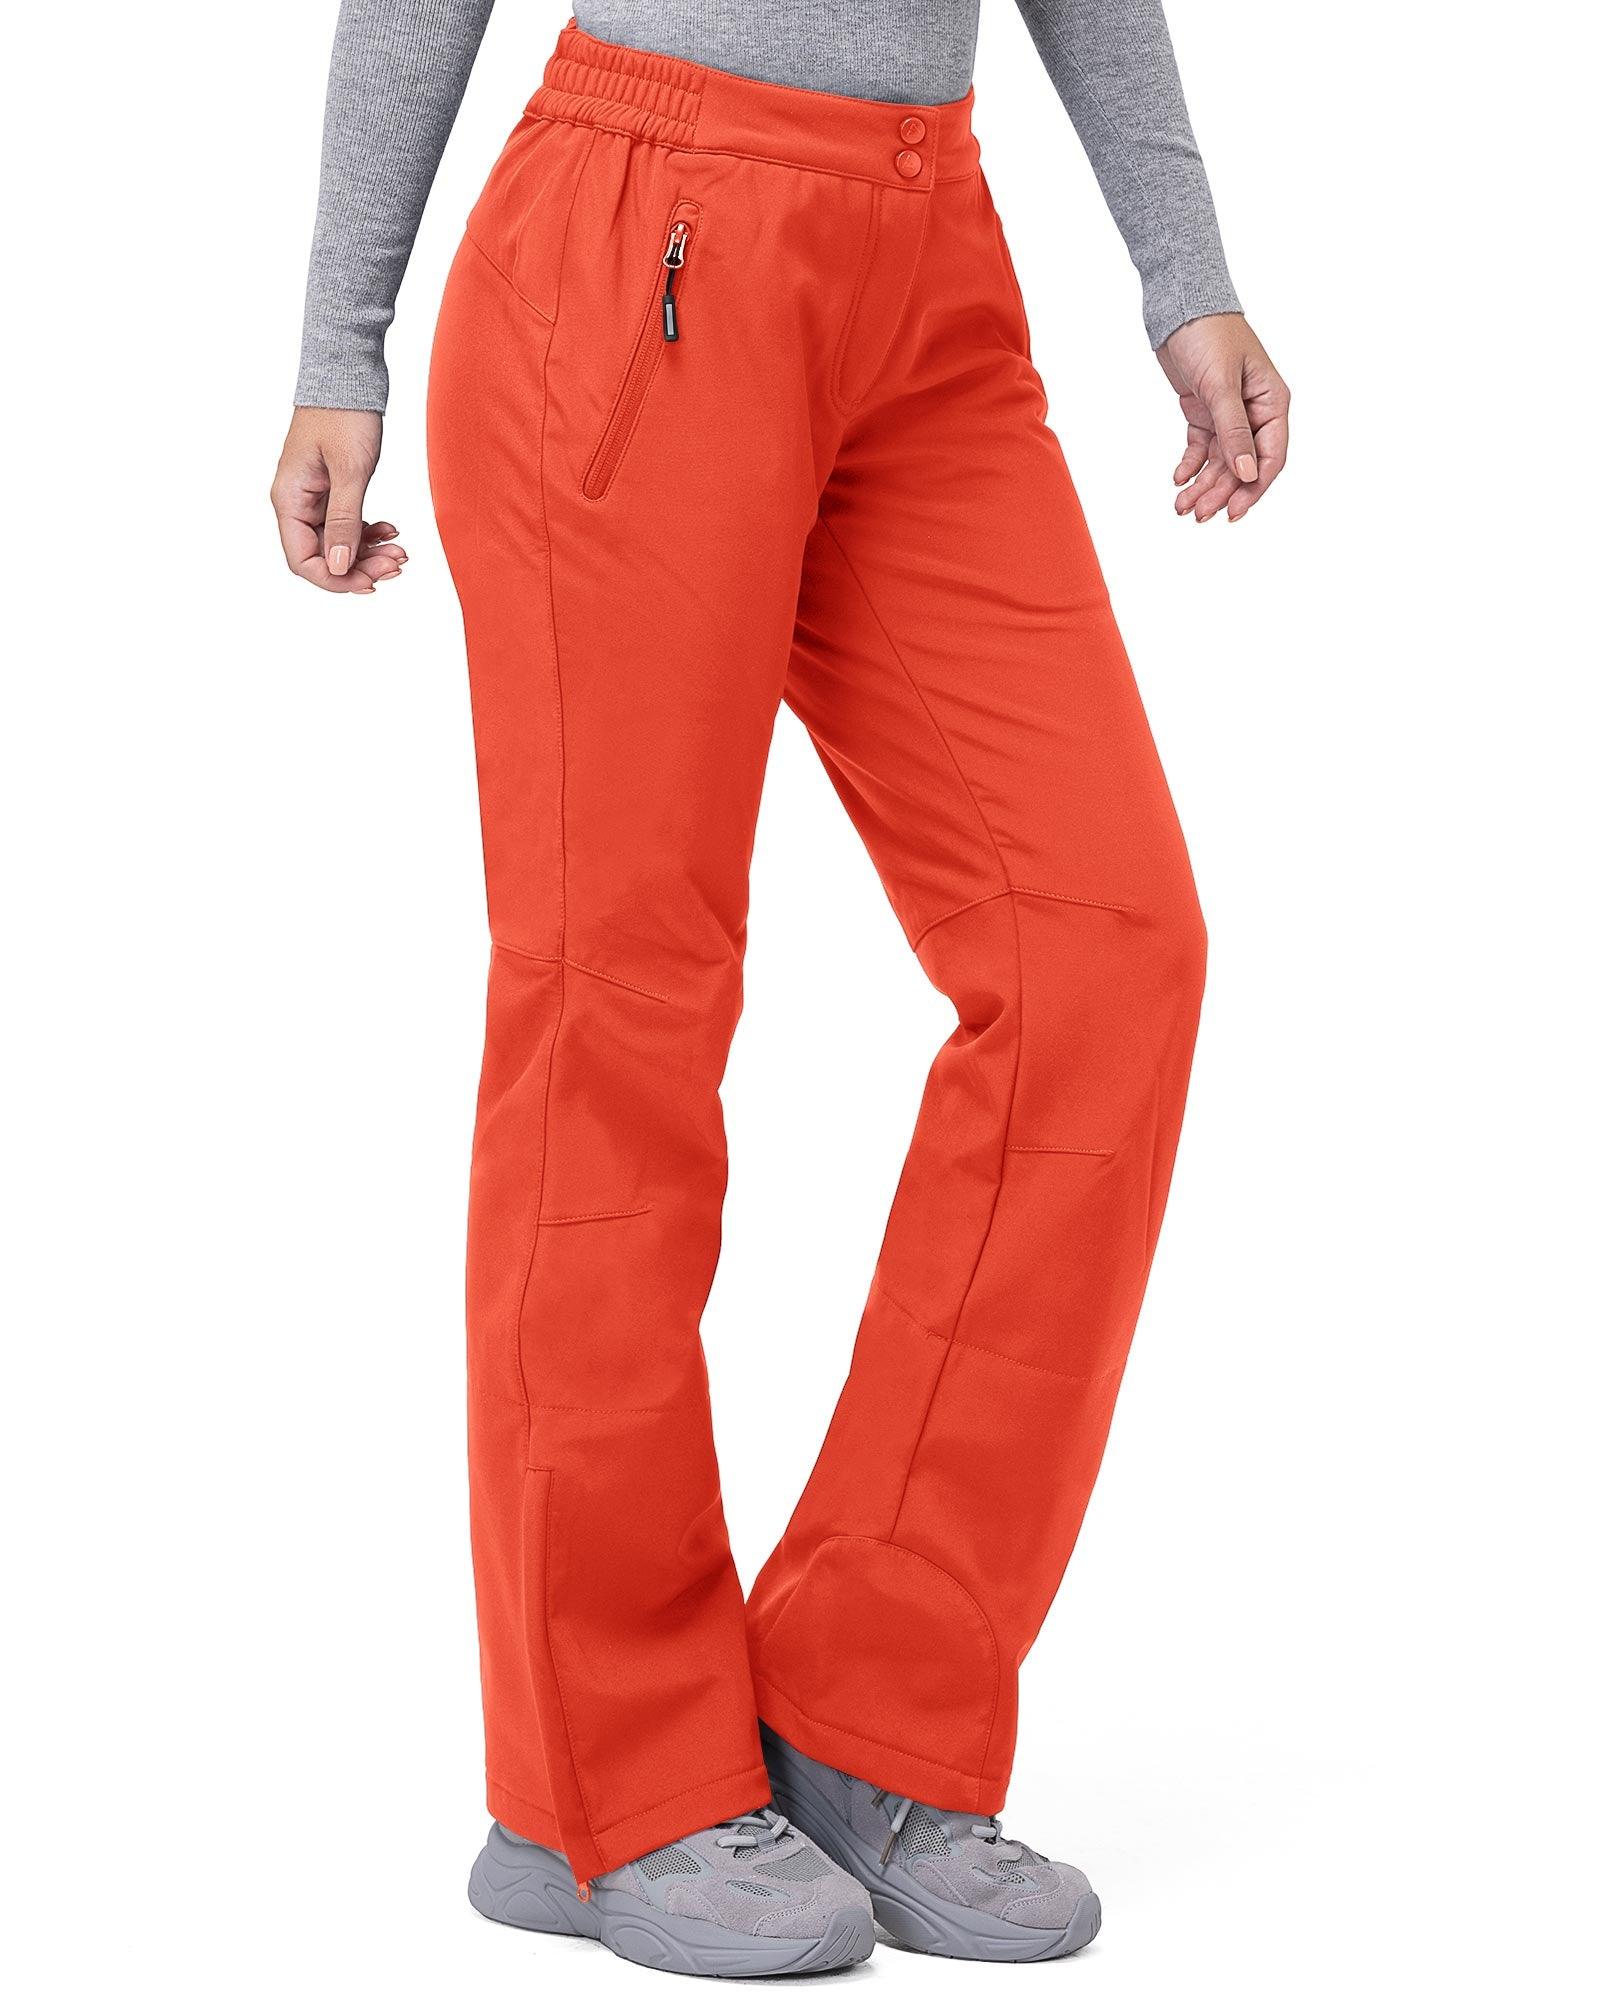 Women's Softshell Insulated Snow Pants with Boot Gaiters: 8000mm W/P I –  33,000ft